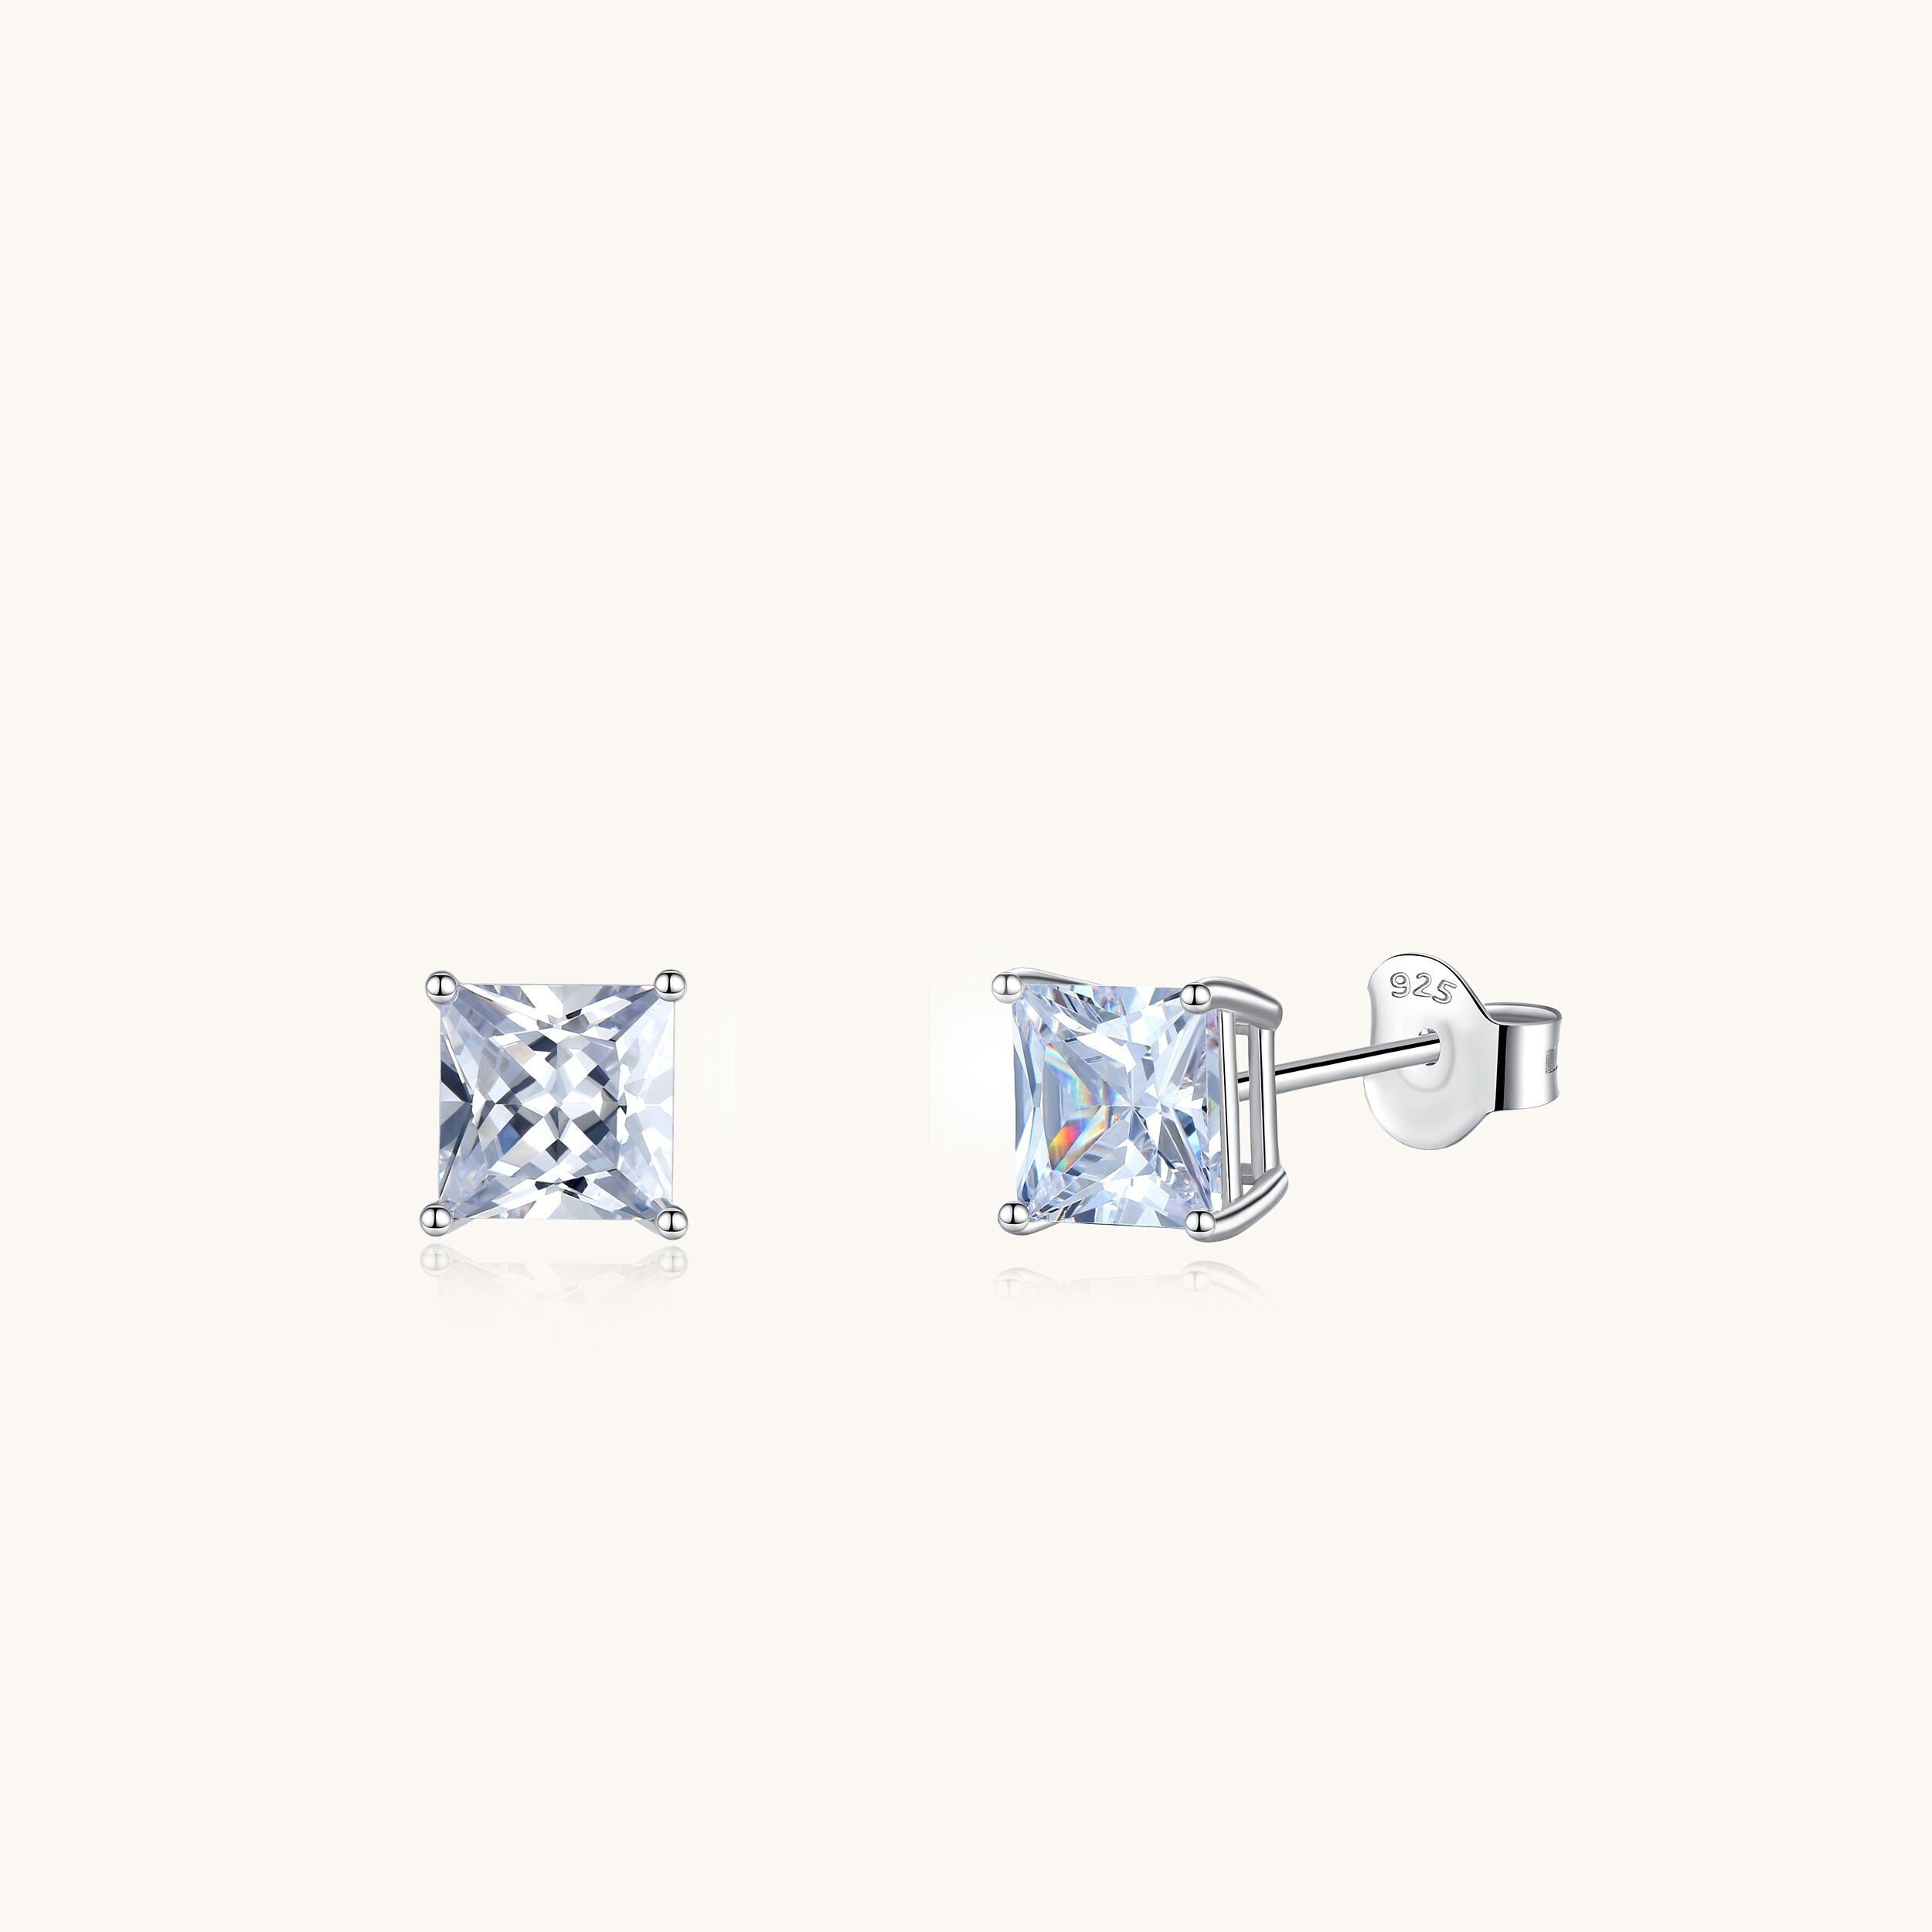 Casting Square Stud Earrings Screw Back .925 Sterling Silver Sizes 2-8mm Available in 3 Colors! from Sonara Jewelry | Wholesale